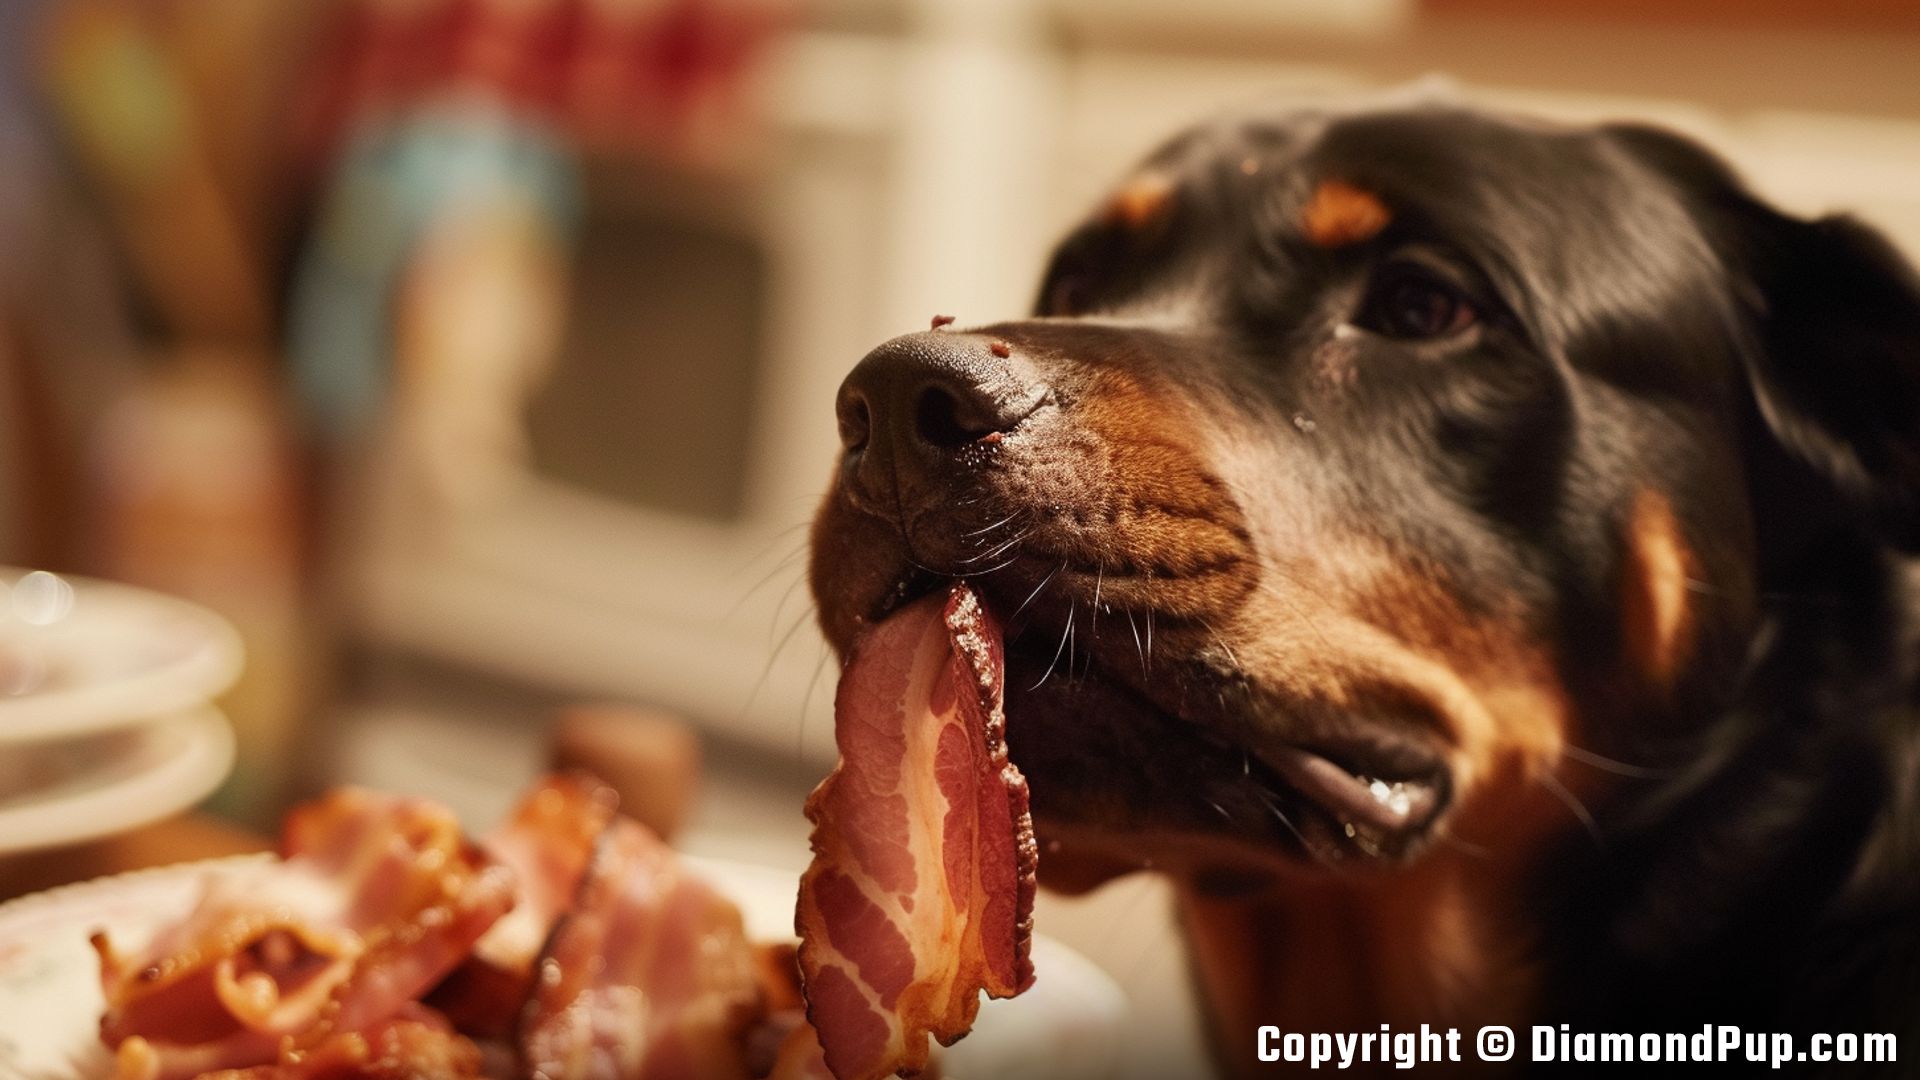 Image of Rottweiler Snacking on Bacon